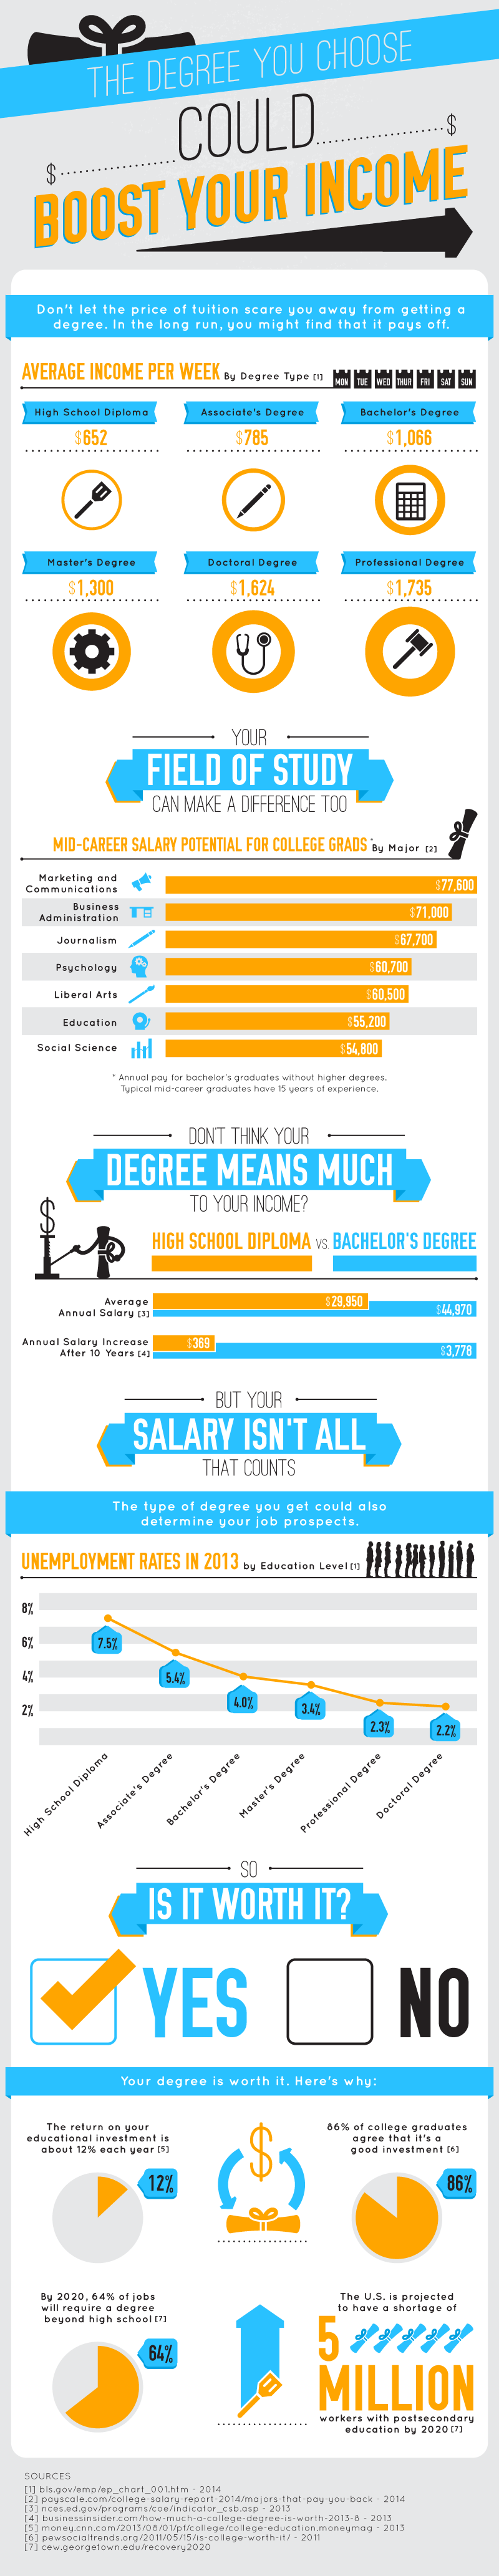 The Degree You Choose Could Boost Your Income